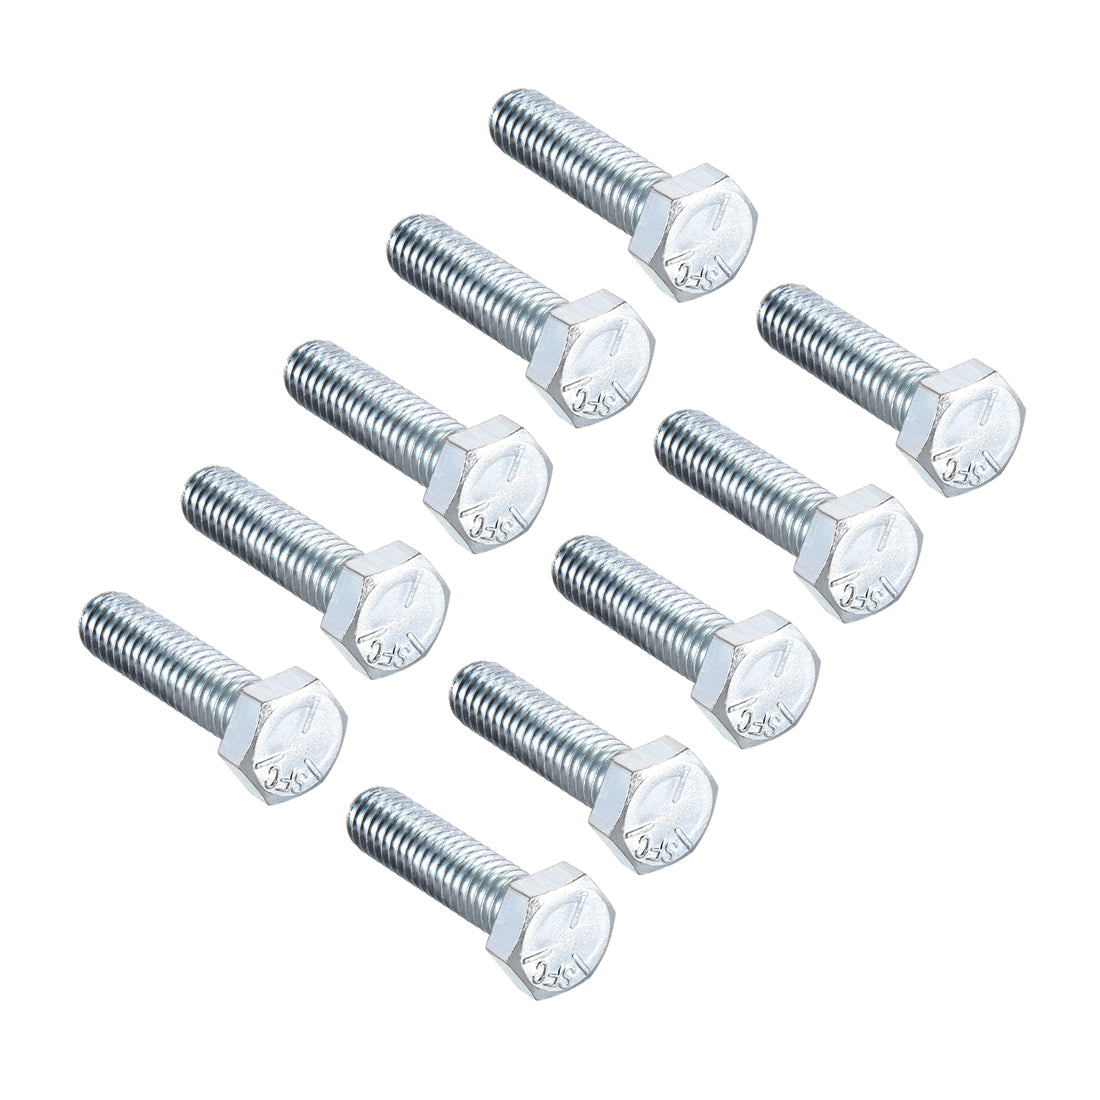 uxcell Uxcell Hex Head Screw Bolts Carbon Steel 5/16"-18*1-1/4" Fastener Grade 5 UNC 10pcs